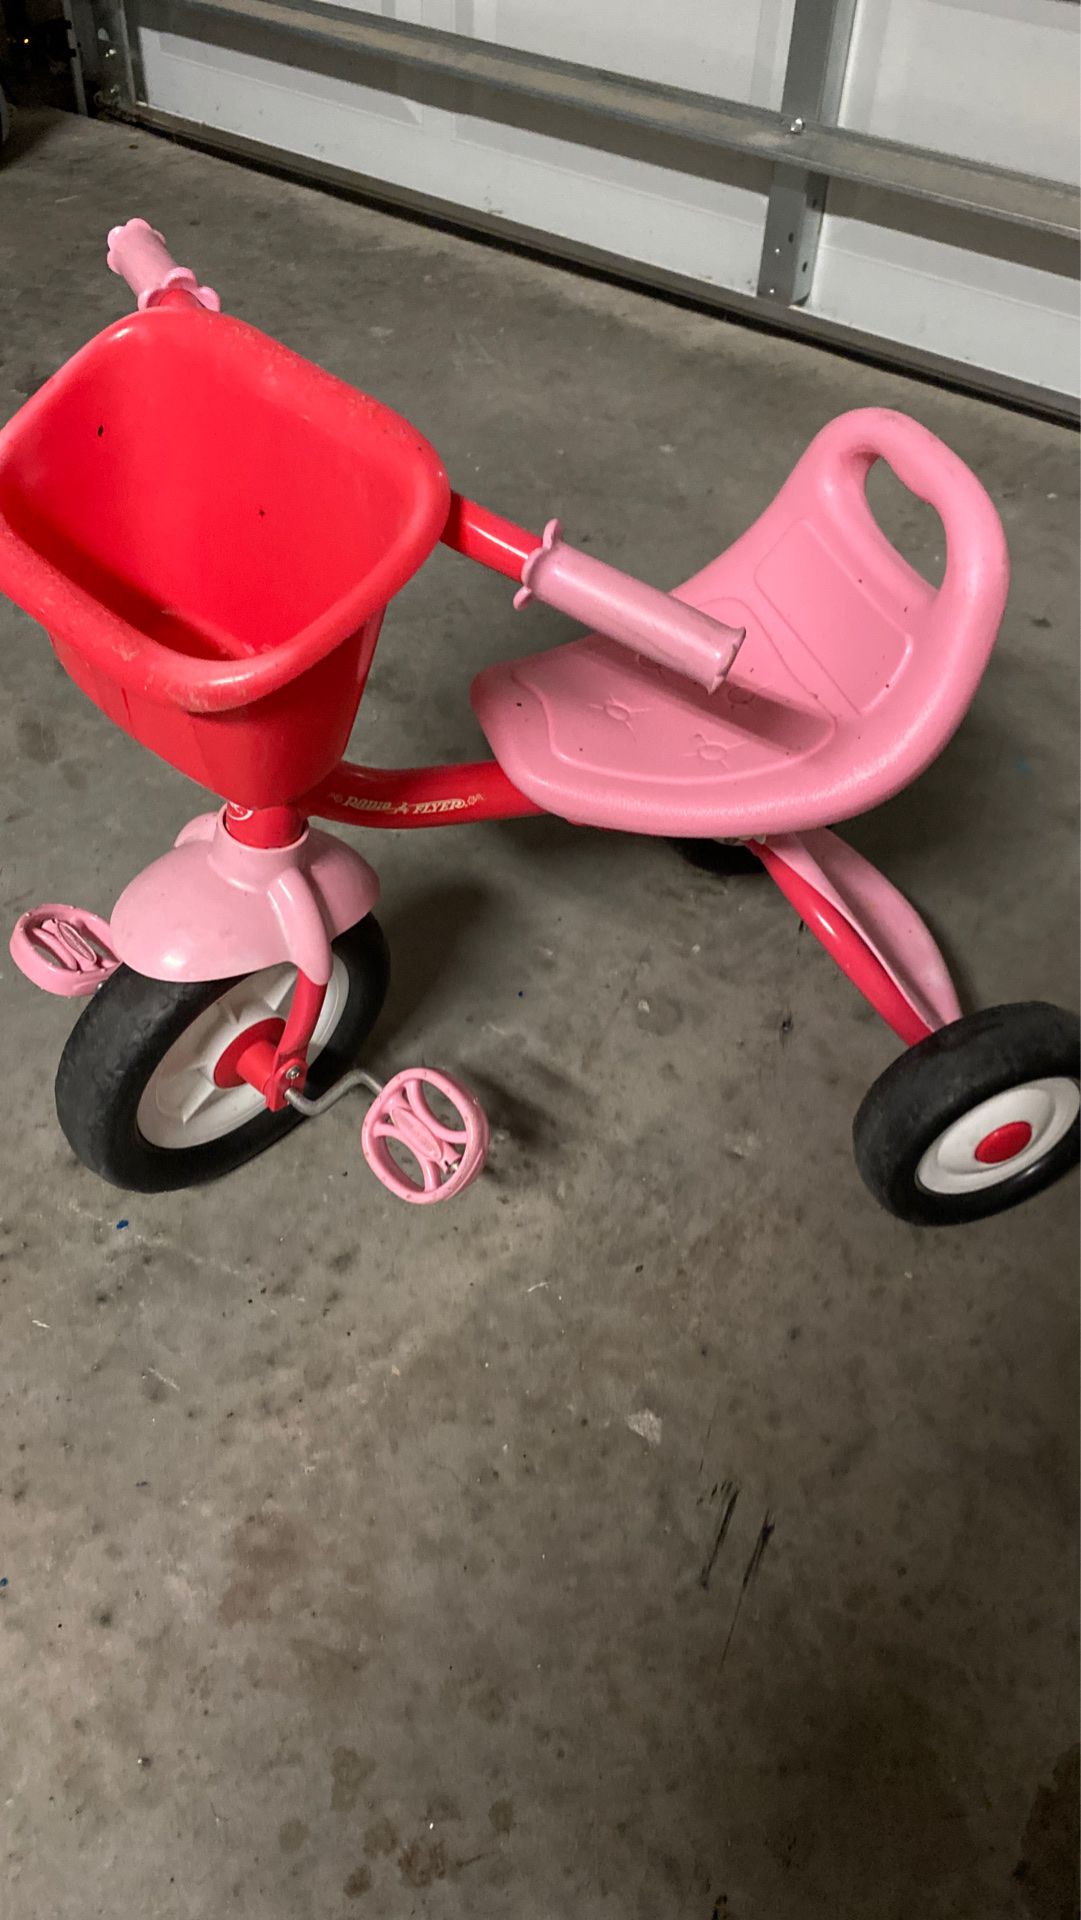 Radio Flyer- Toddler tricycle